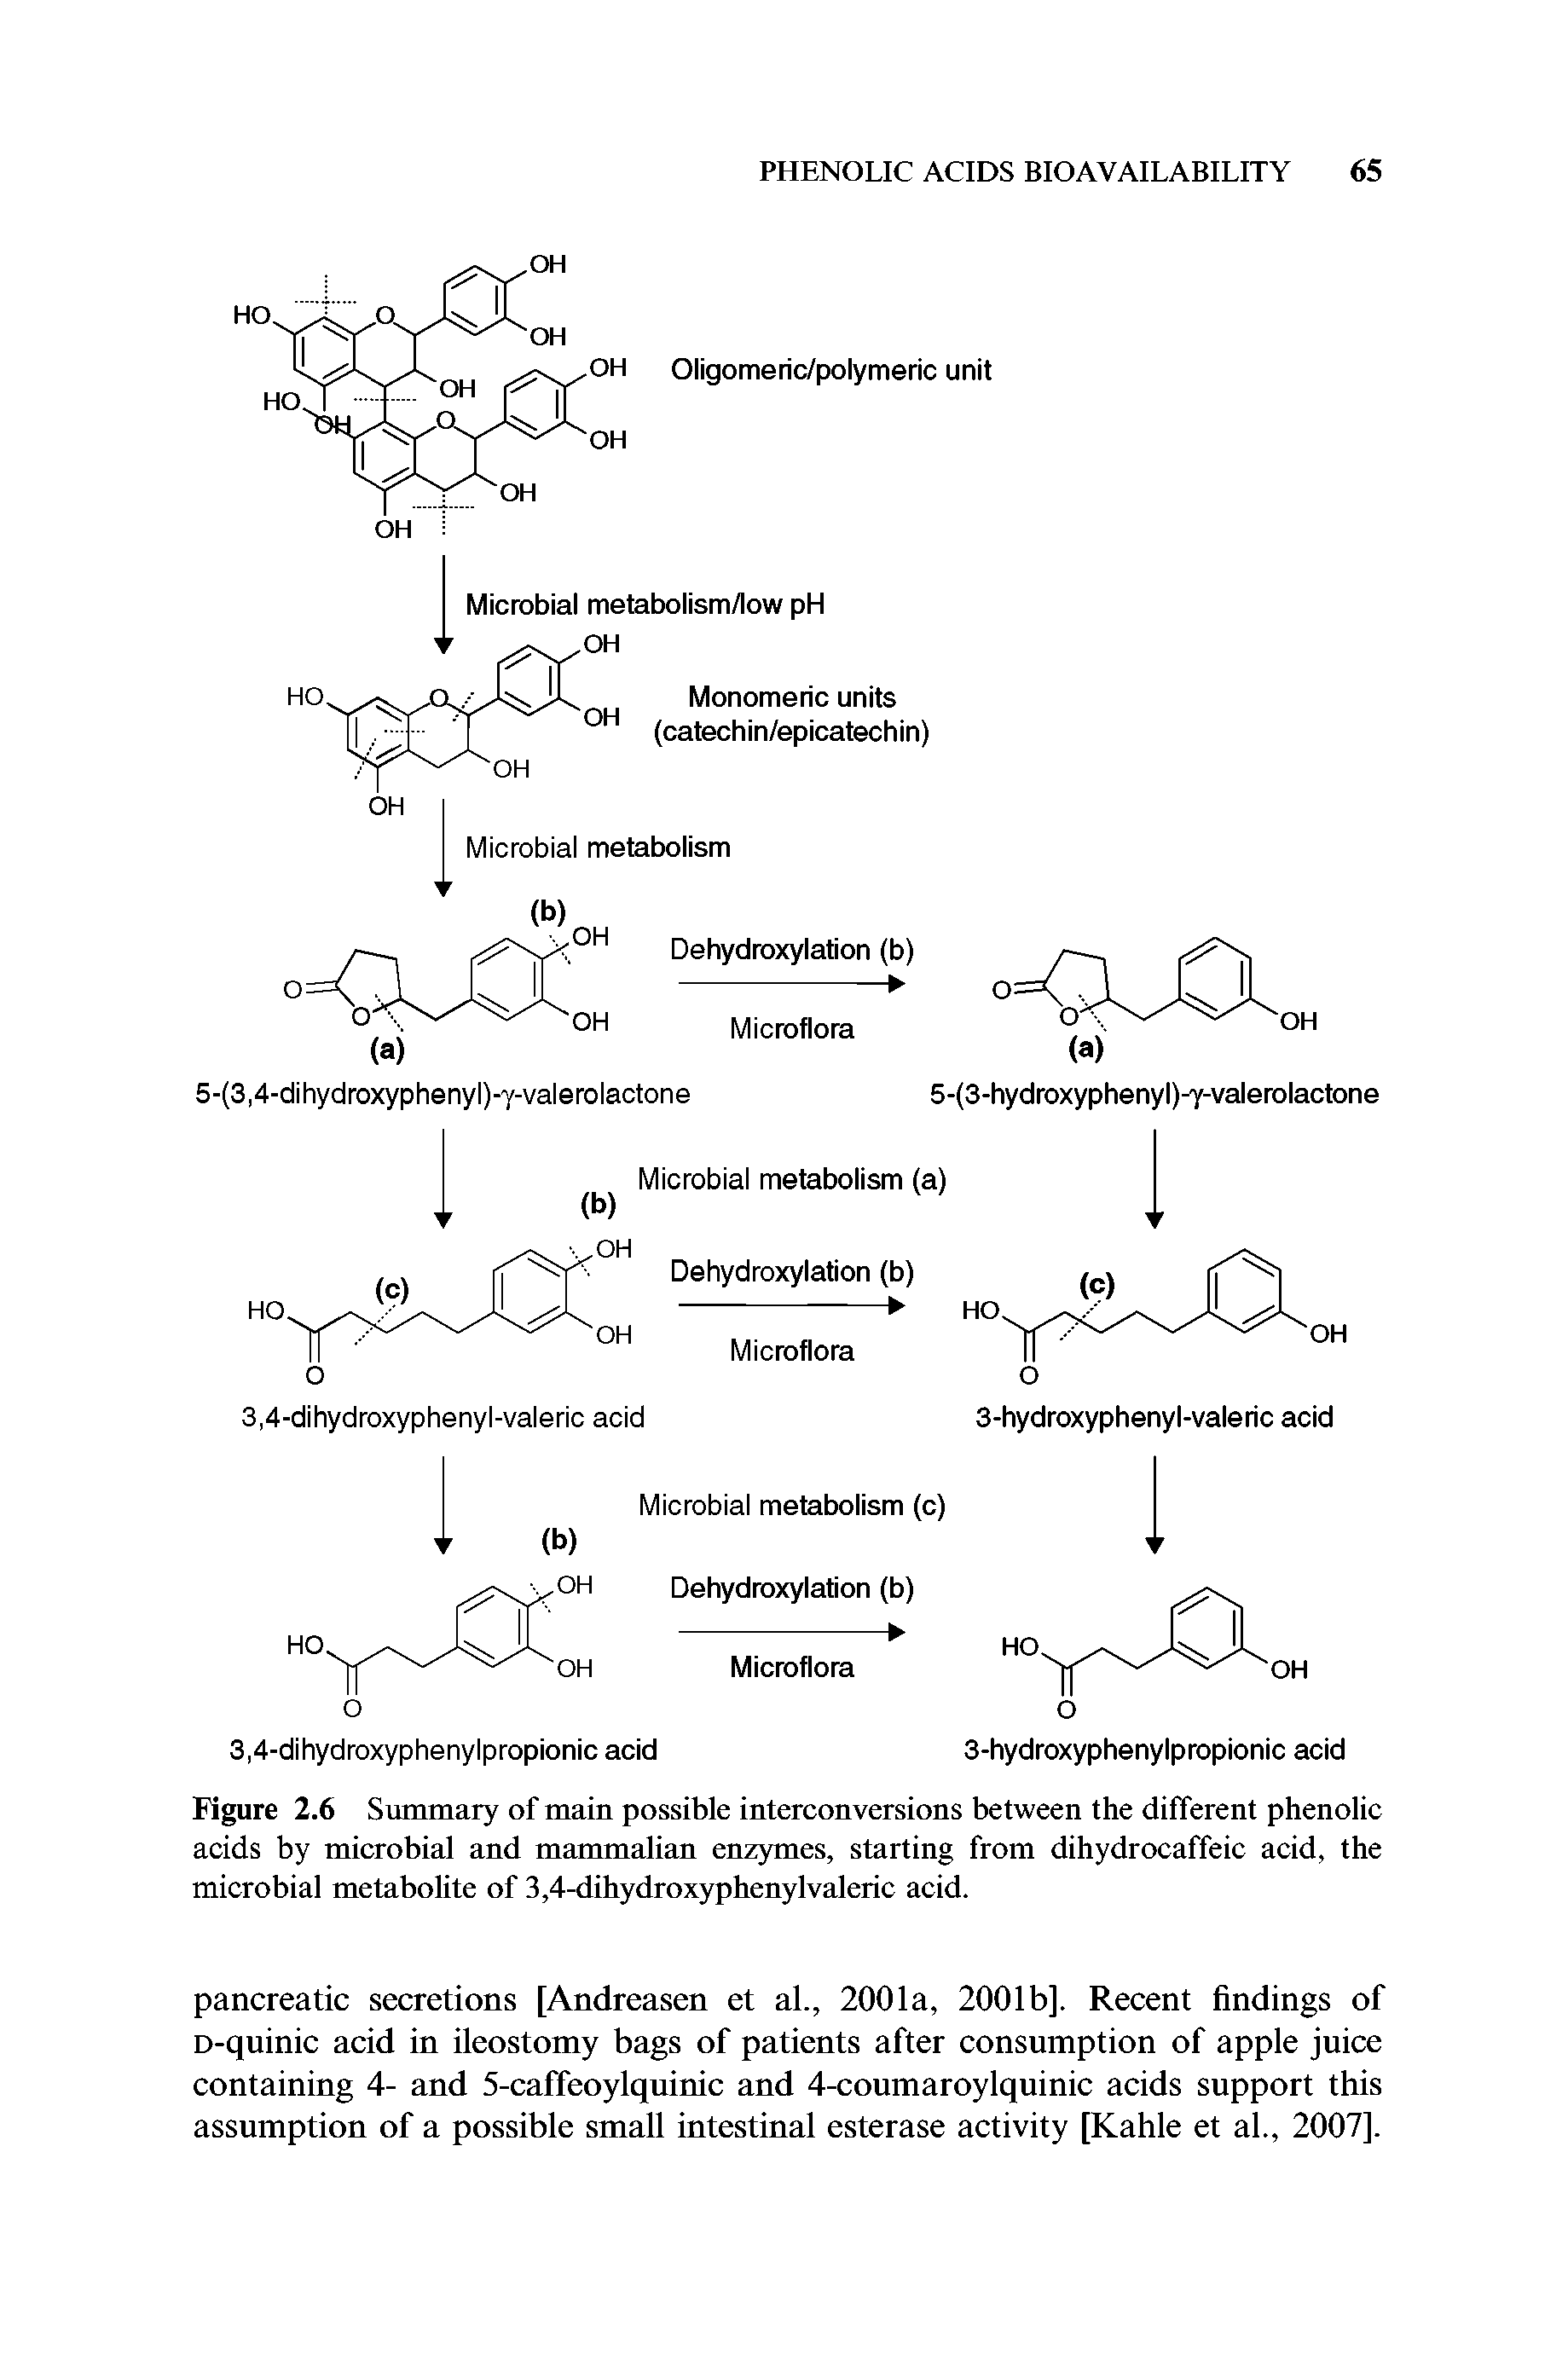 Figure 2.6 Summary of main possible interconversions between the different phenolic acids by microbial and mammalian enzymes, starting from dihydrocaffeic acid, the microbial metabolite of 3,4-dihydroxyphenylvaleric acid.